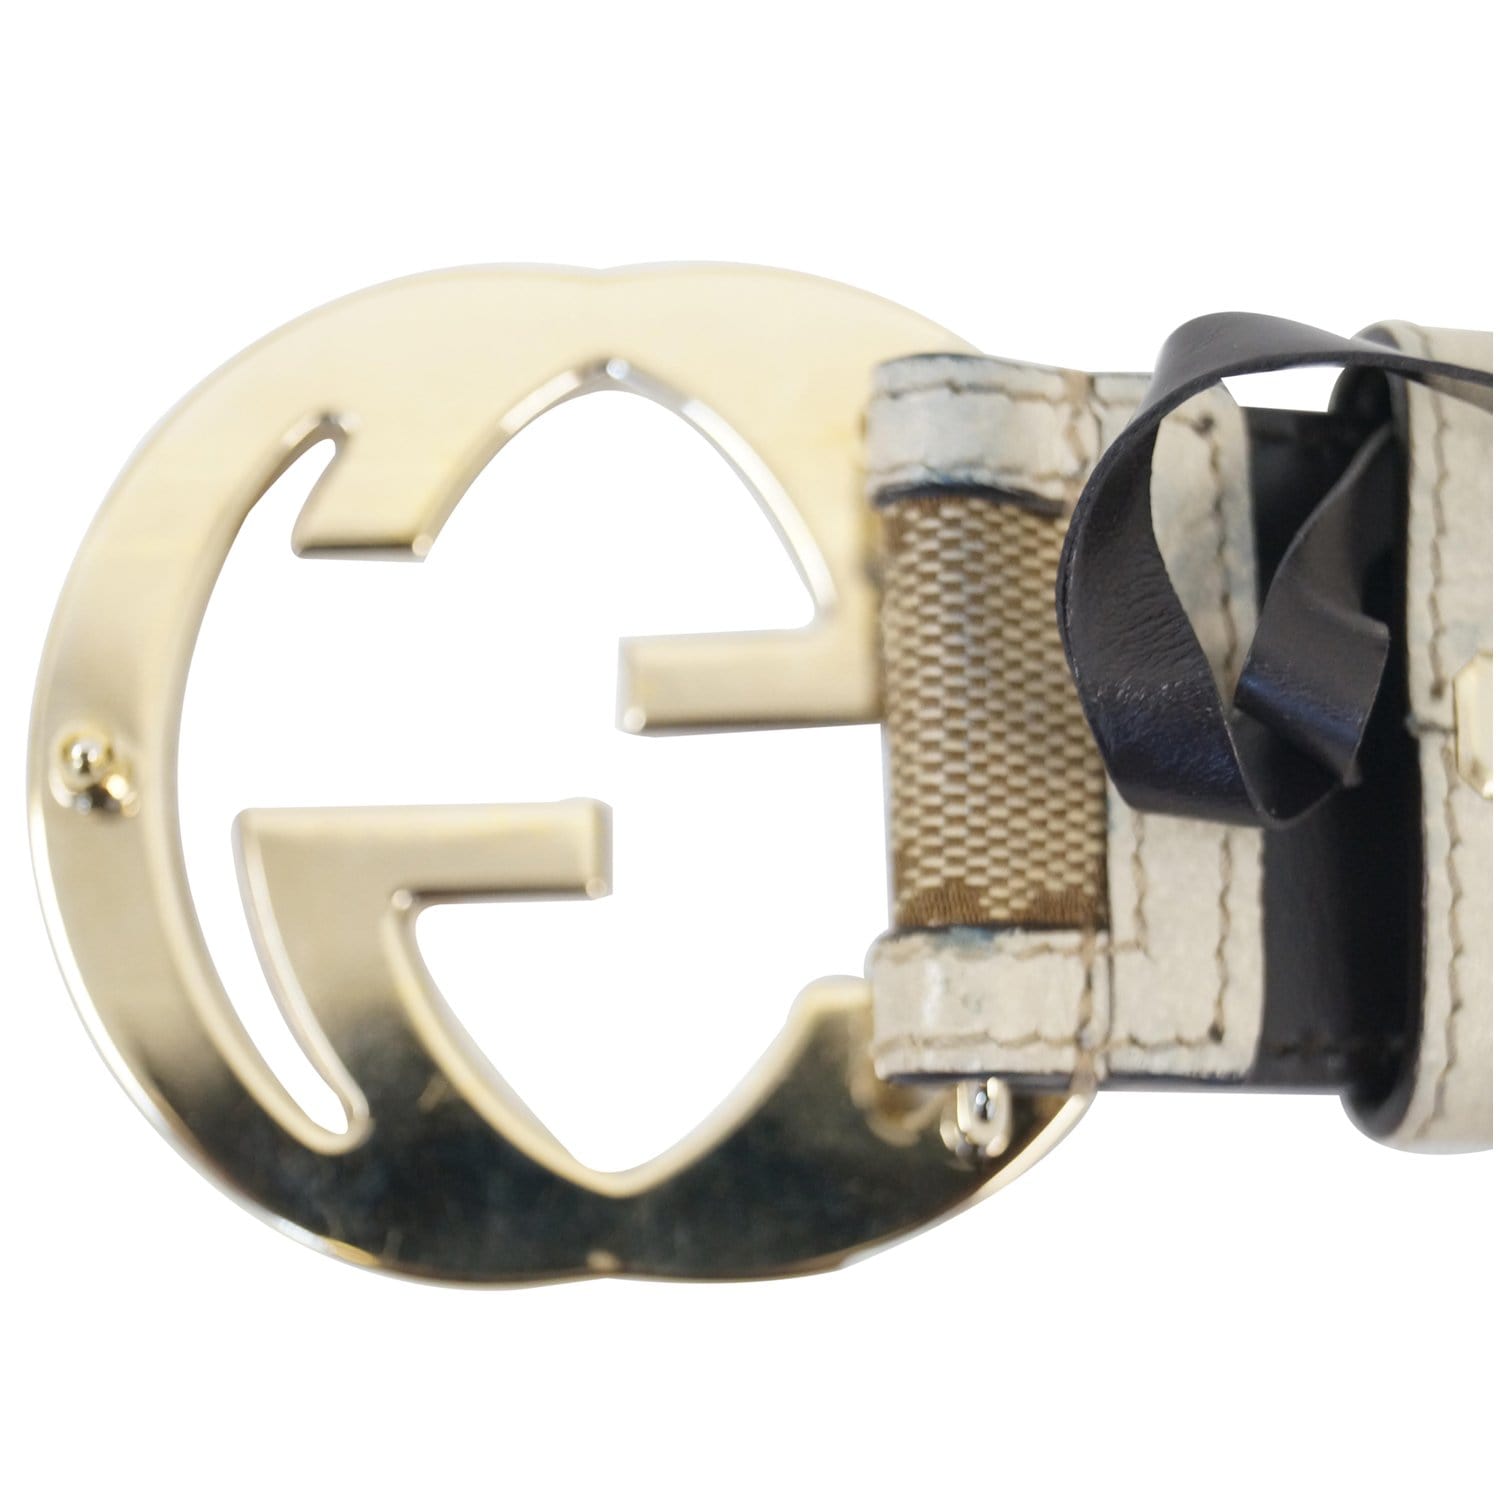 LADIES SIGNATURE GOLDTONE DOUBLE G GUCCI BELT BUCKLE WITH NAVY RED SIG BELT  SM